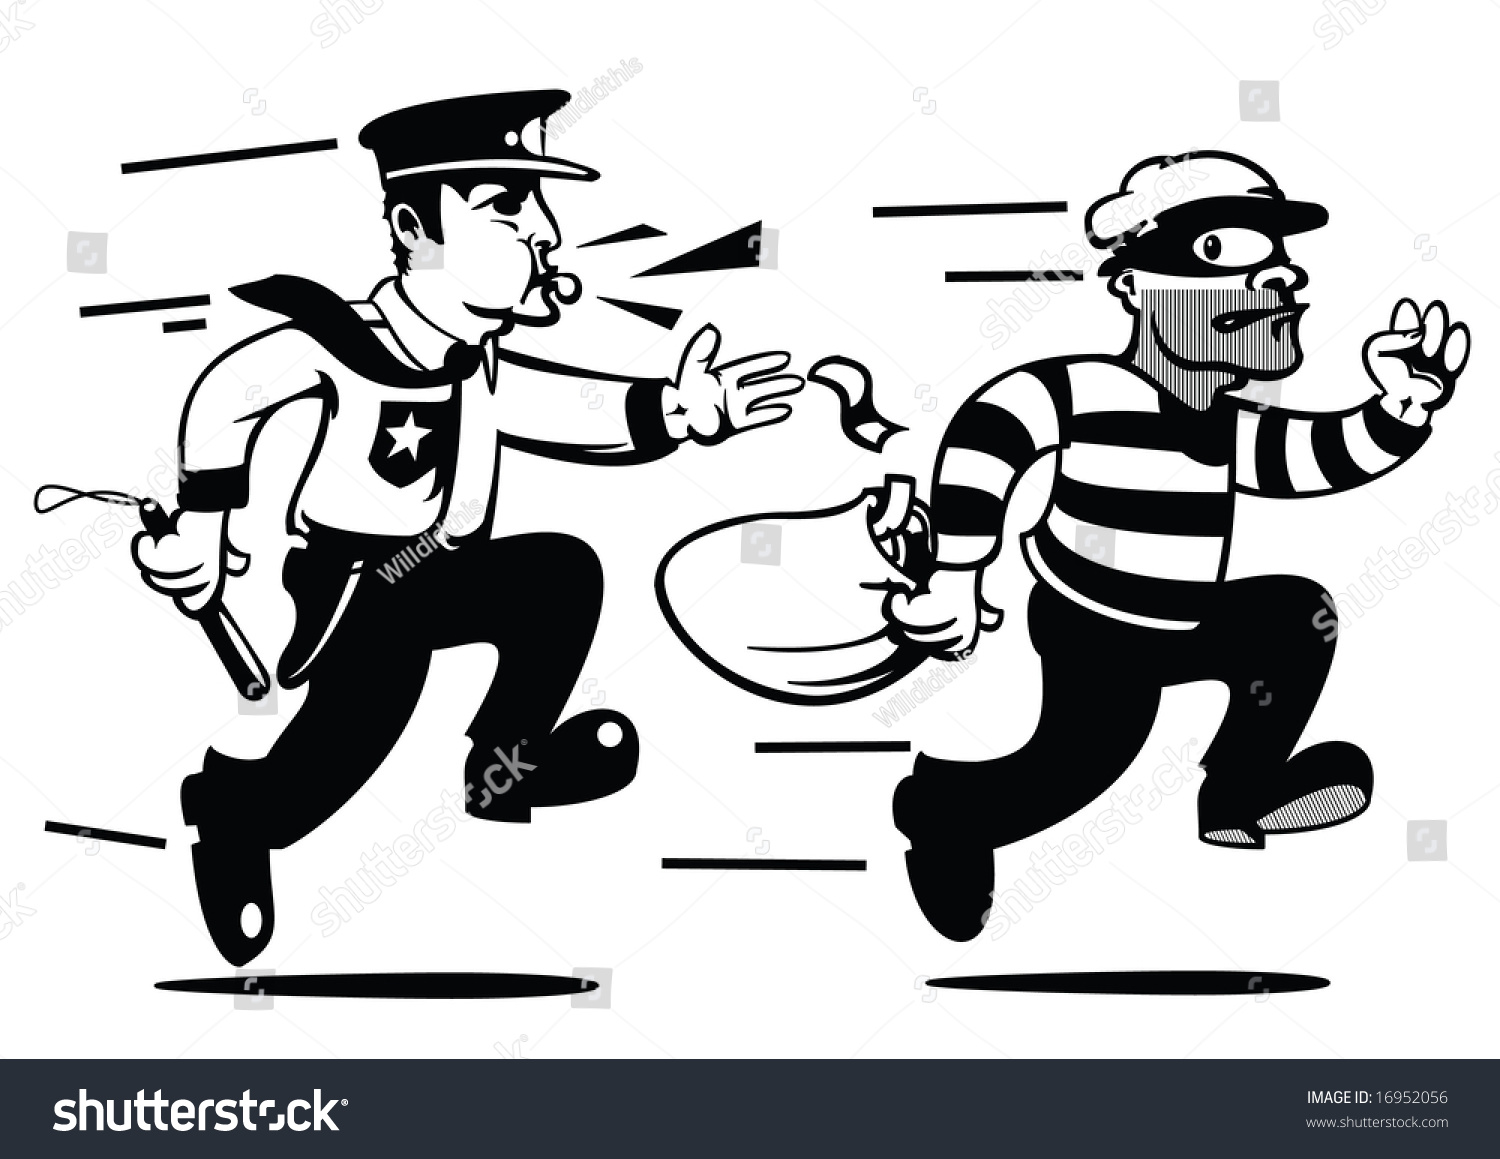 clipart bank robber - photo #50